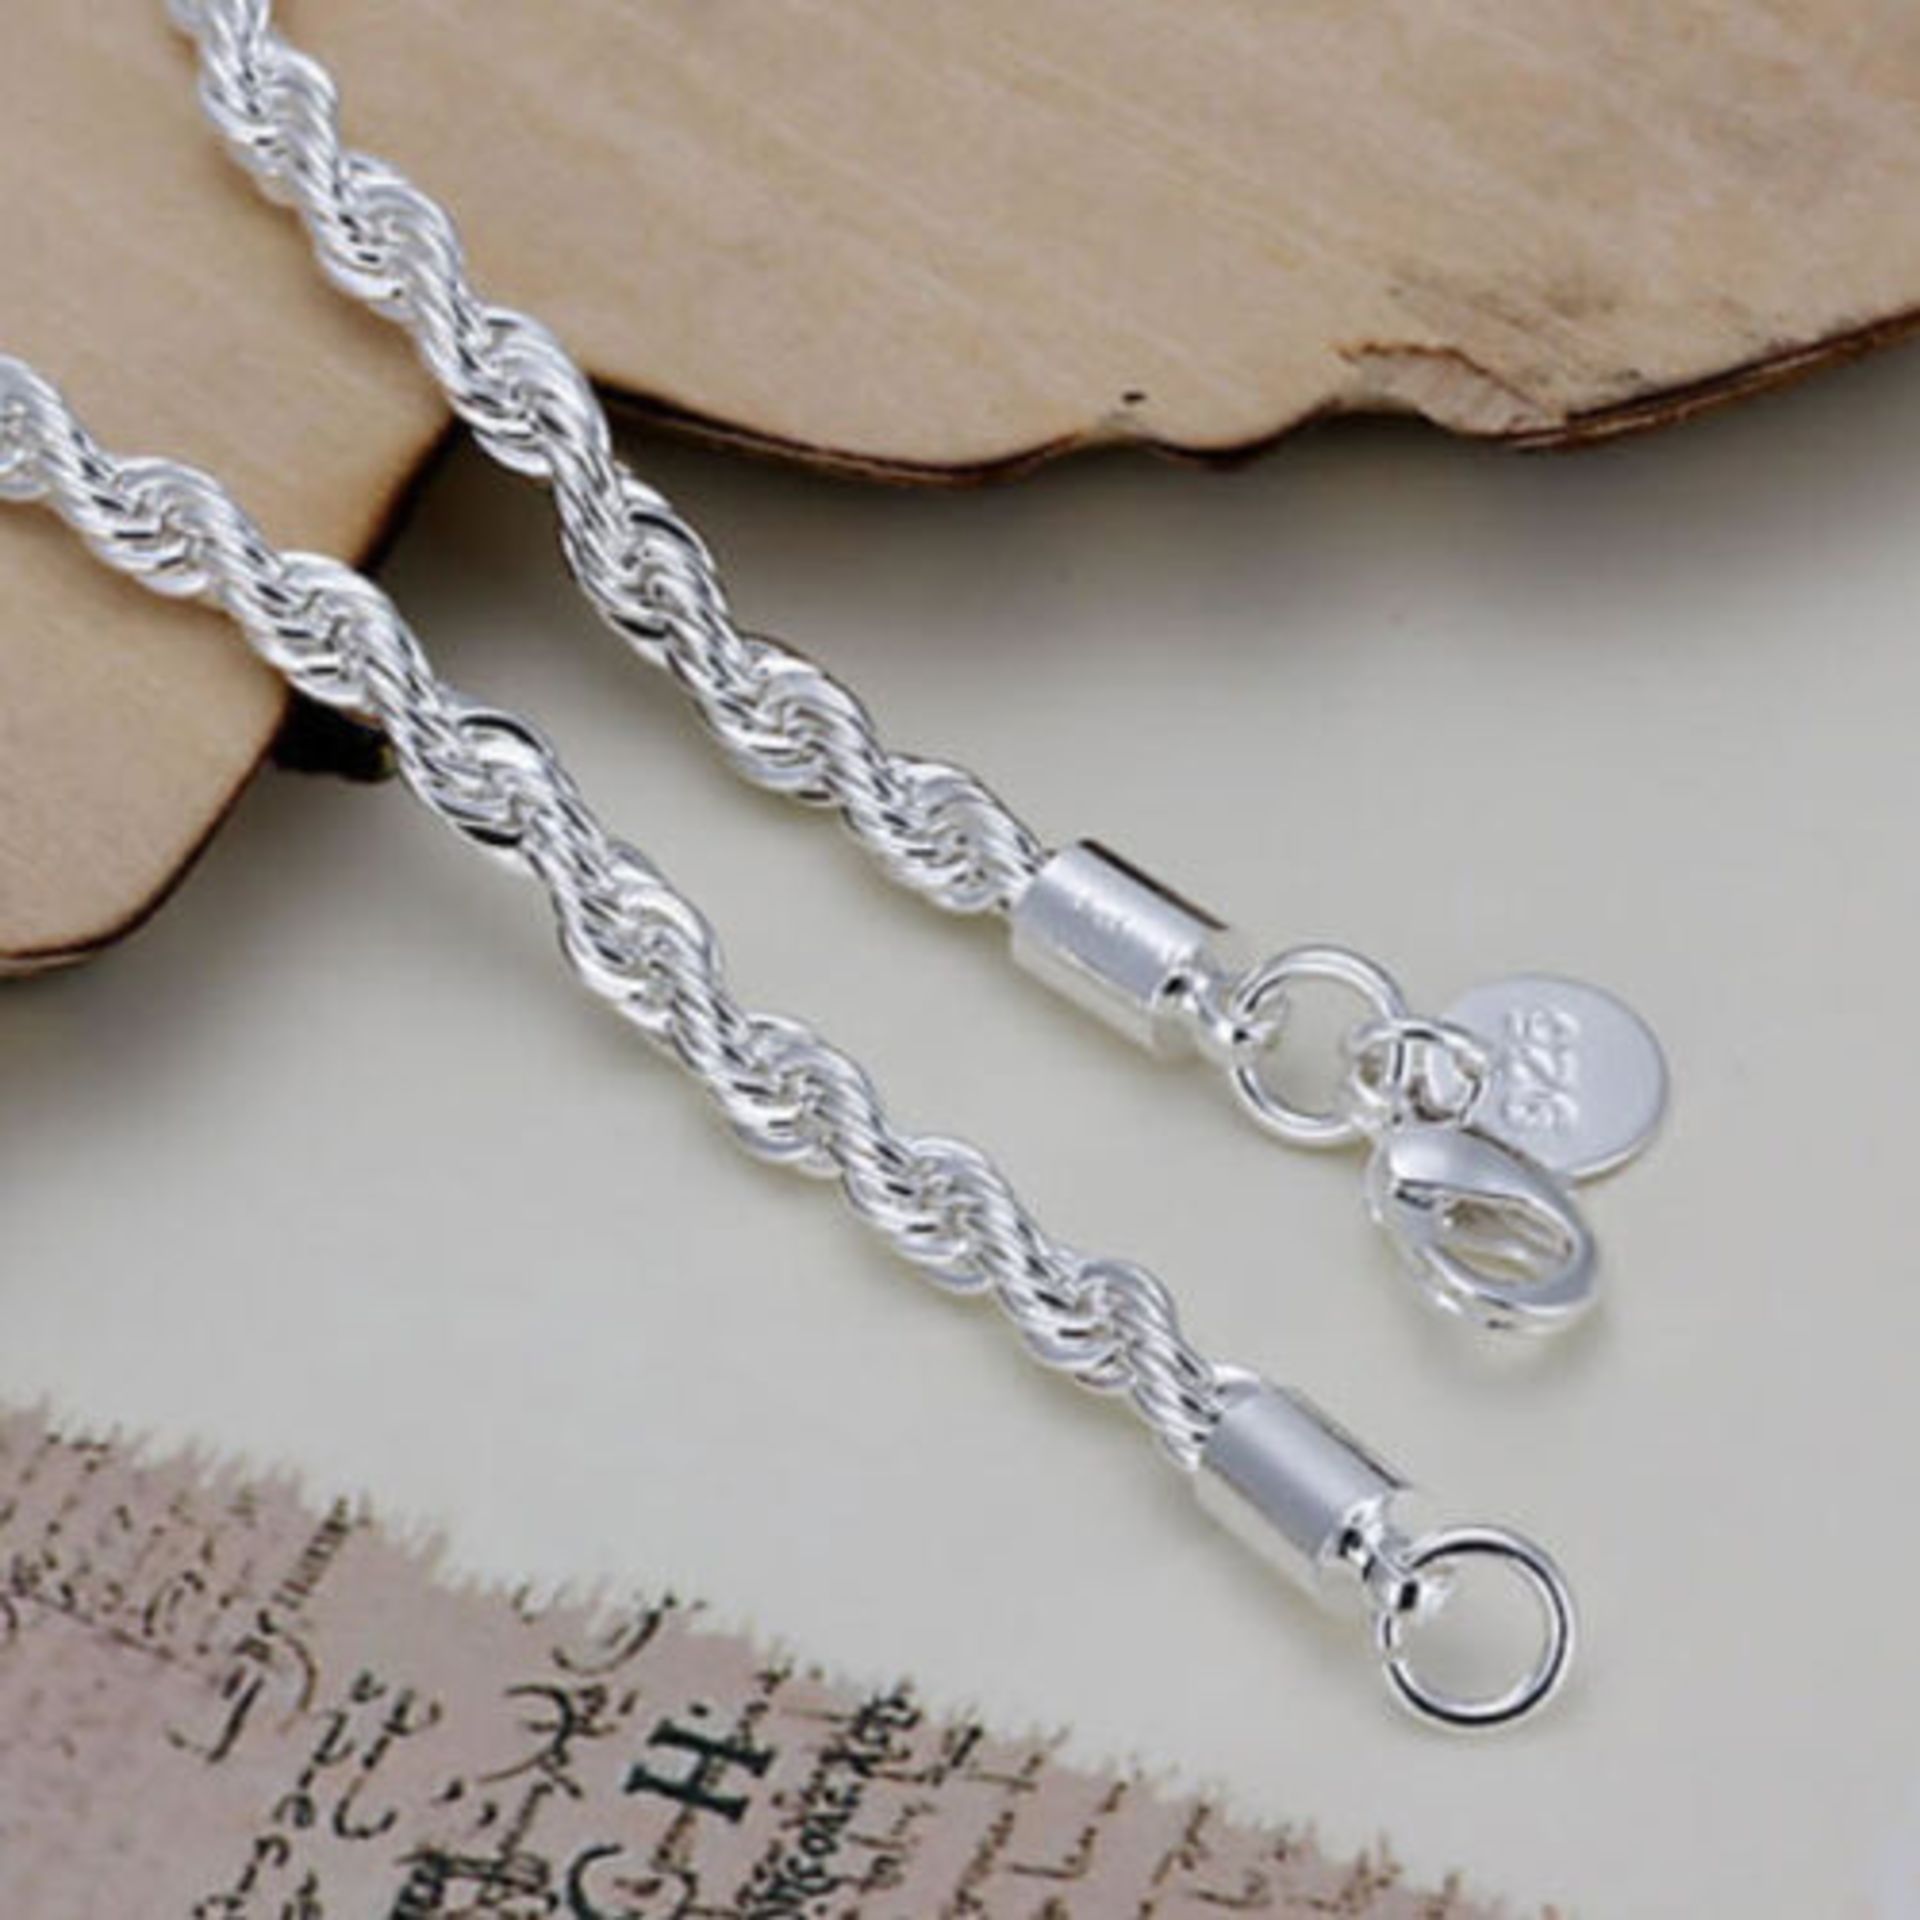 925 Sterling Silver Twisted Rope Bracelet 3mm Thick Chain Link *NO VAT* - Image 4 of 4